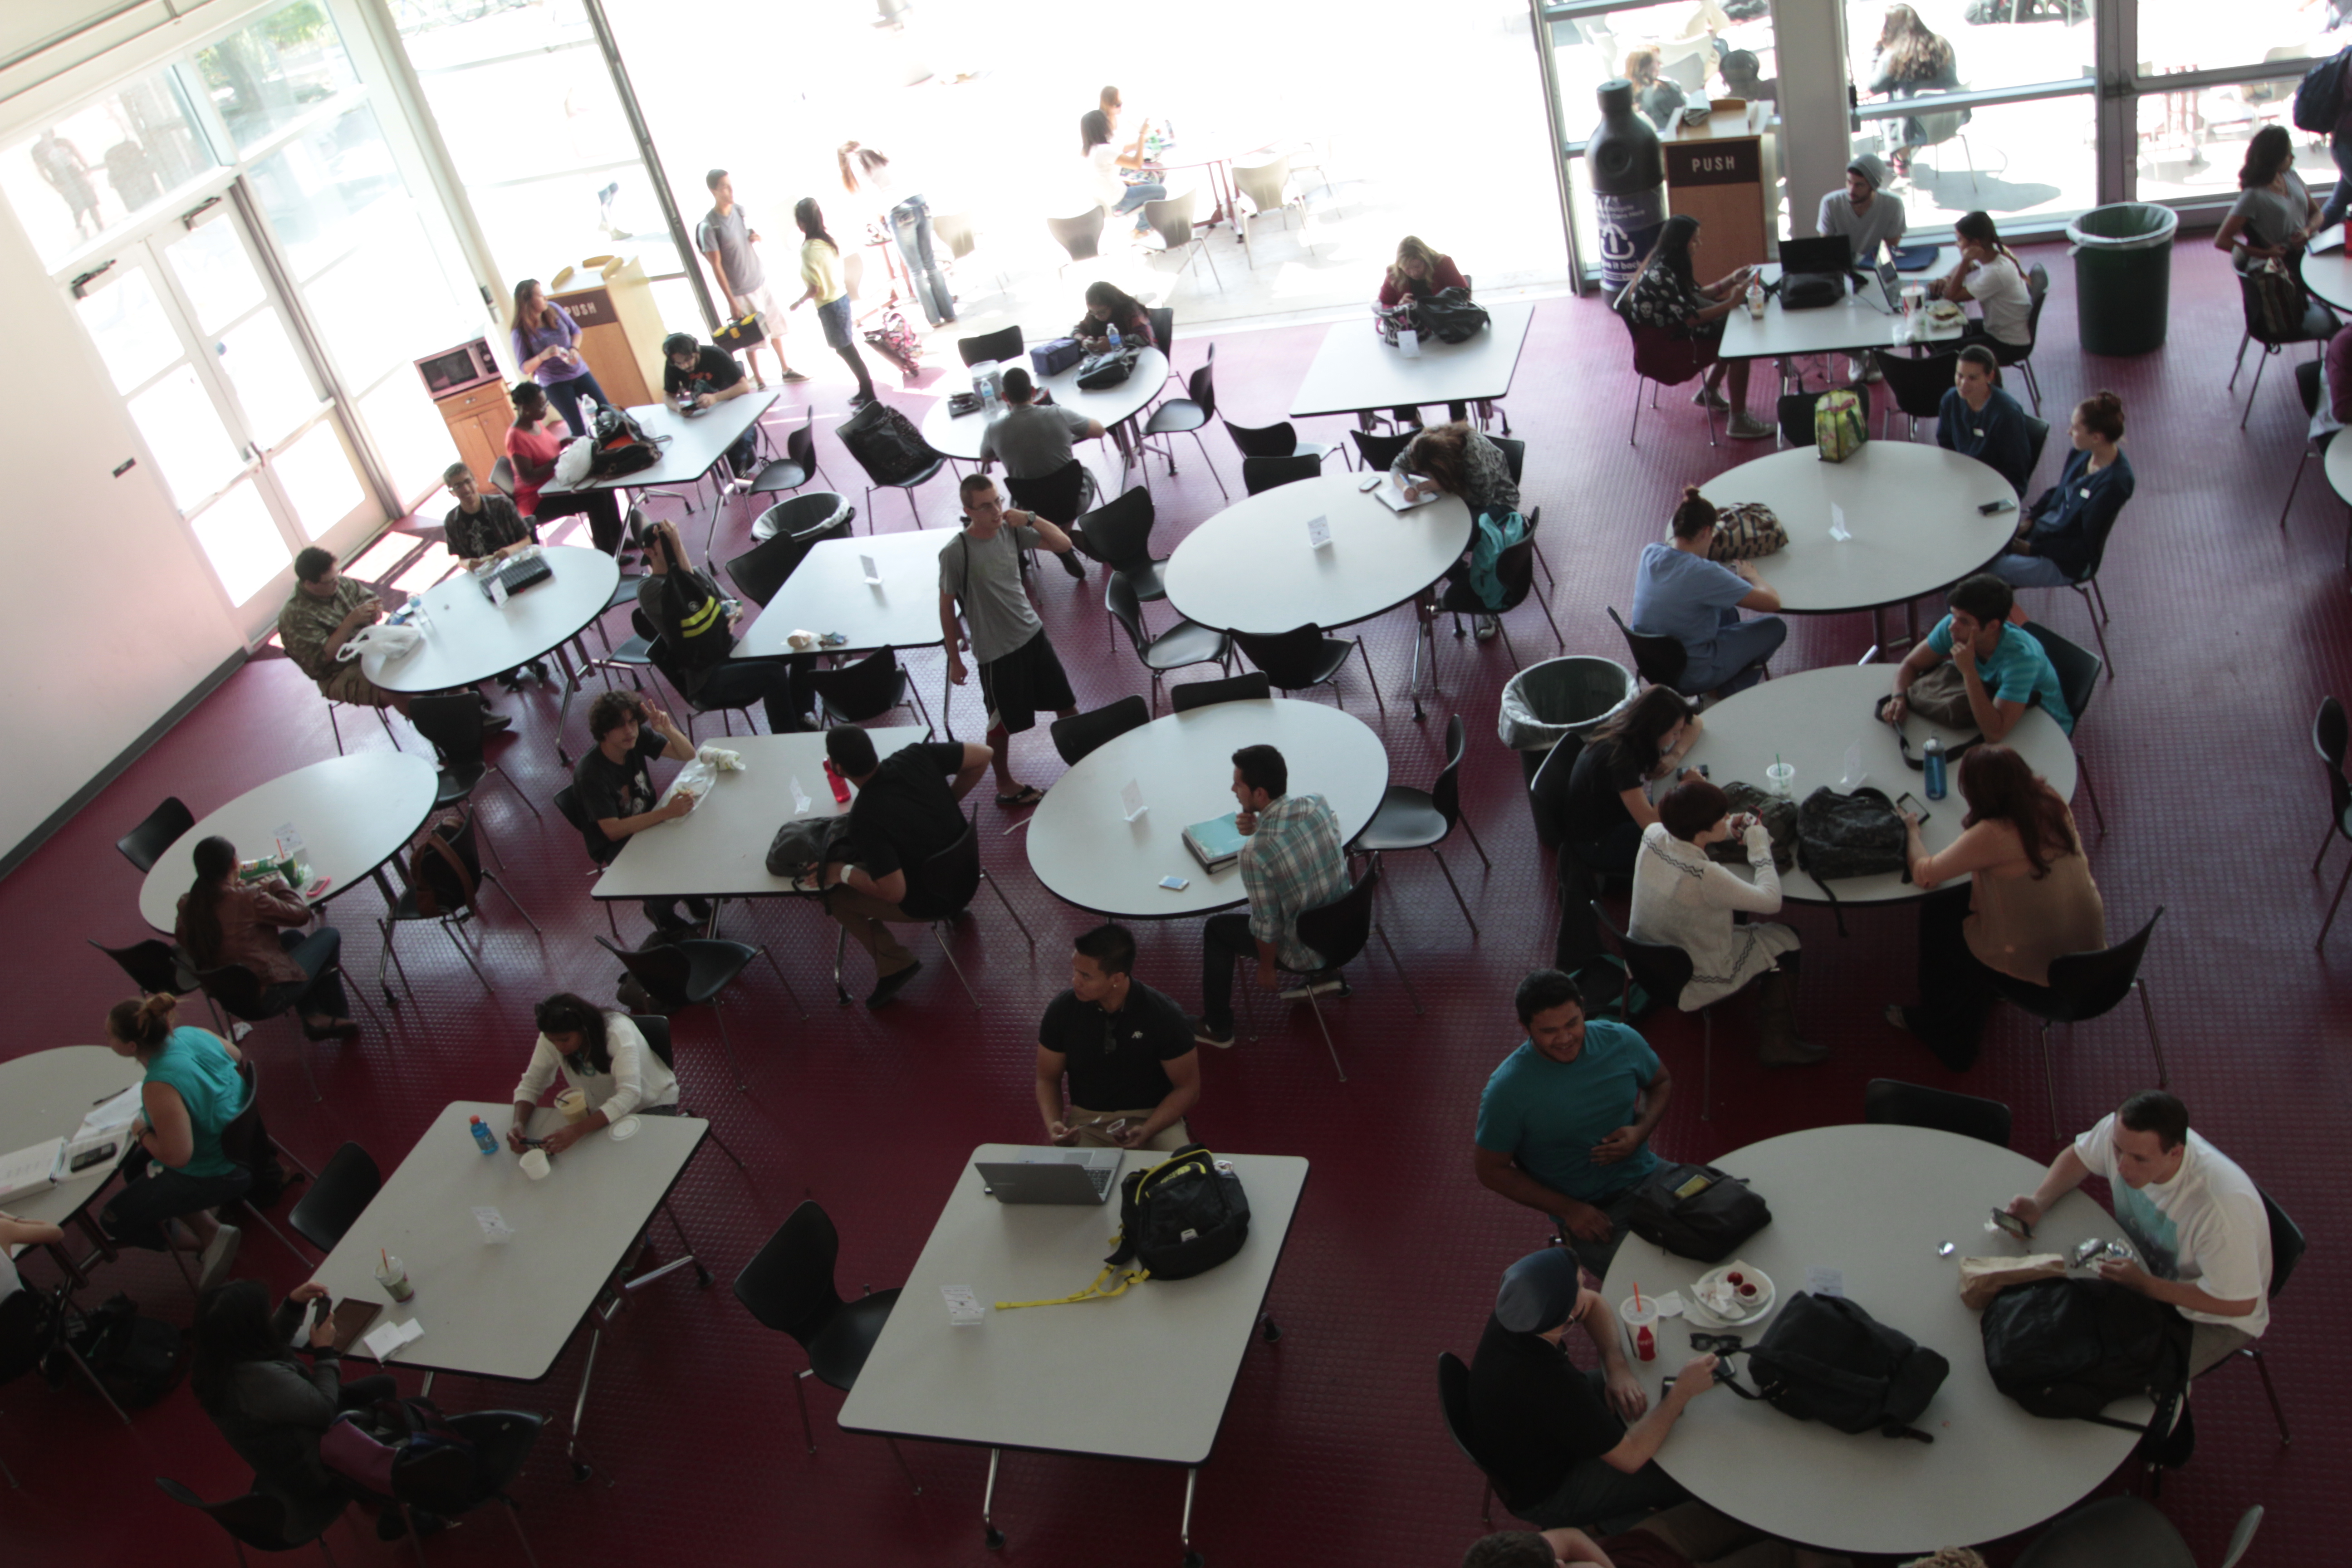 Students enjoy their lunches in the cafeteria on Sept. 29, 2014. (Gary West/The Telescope)